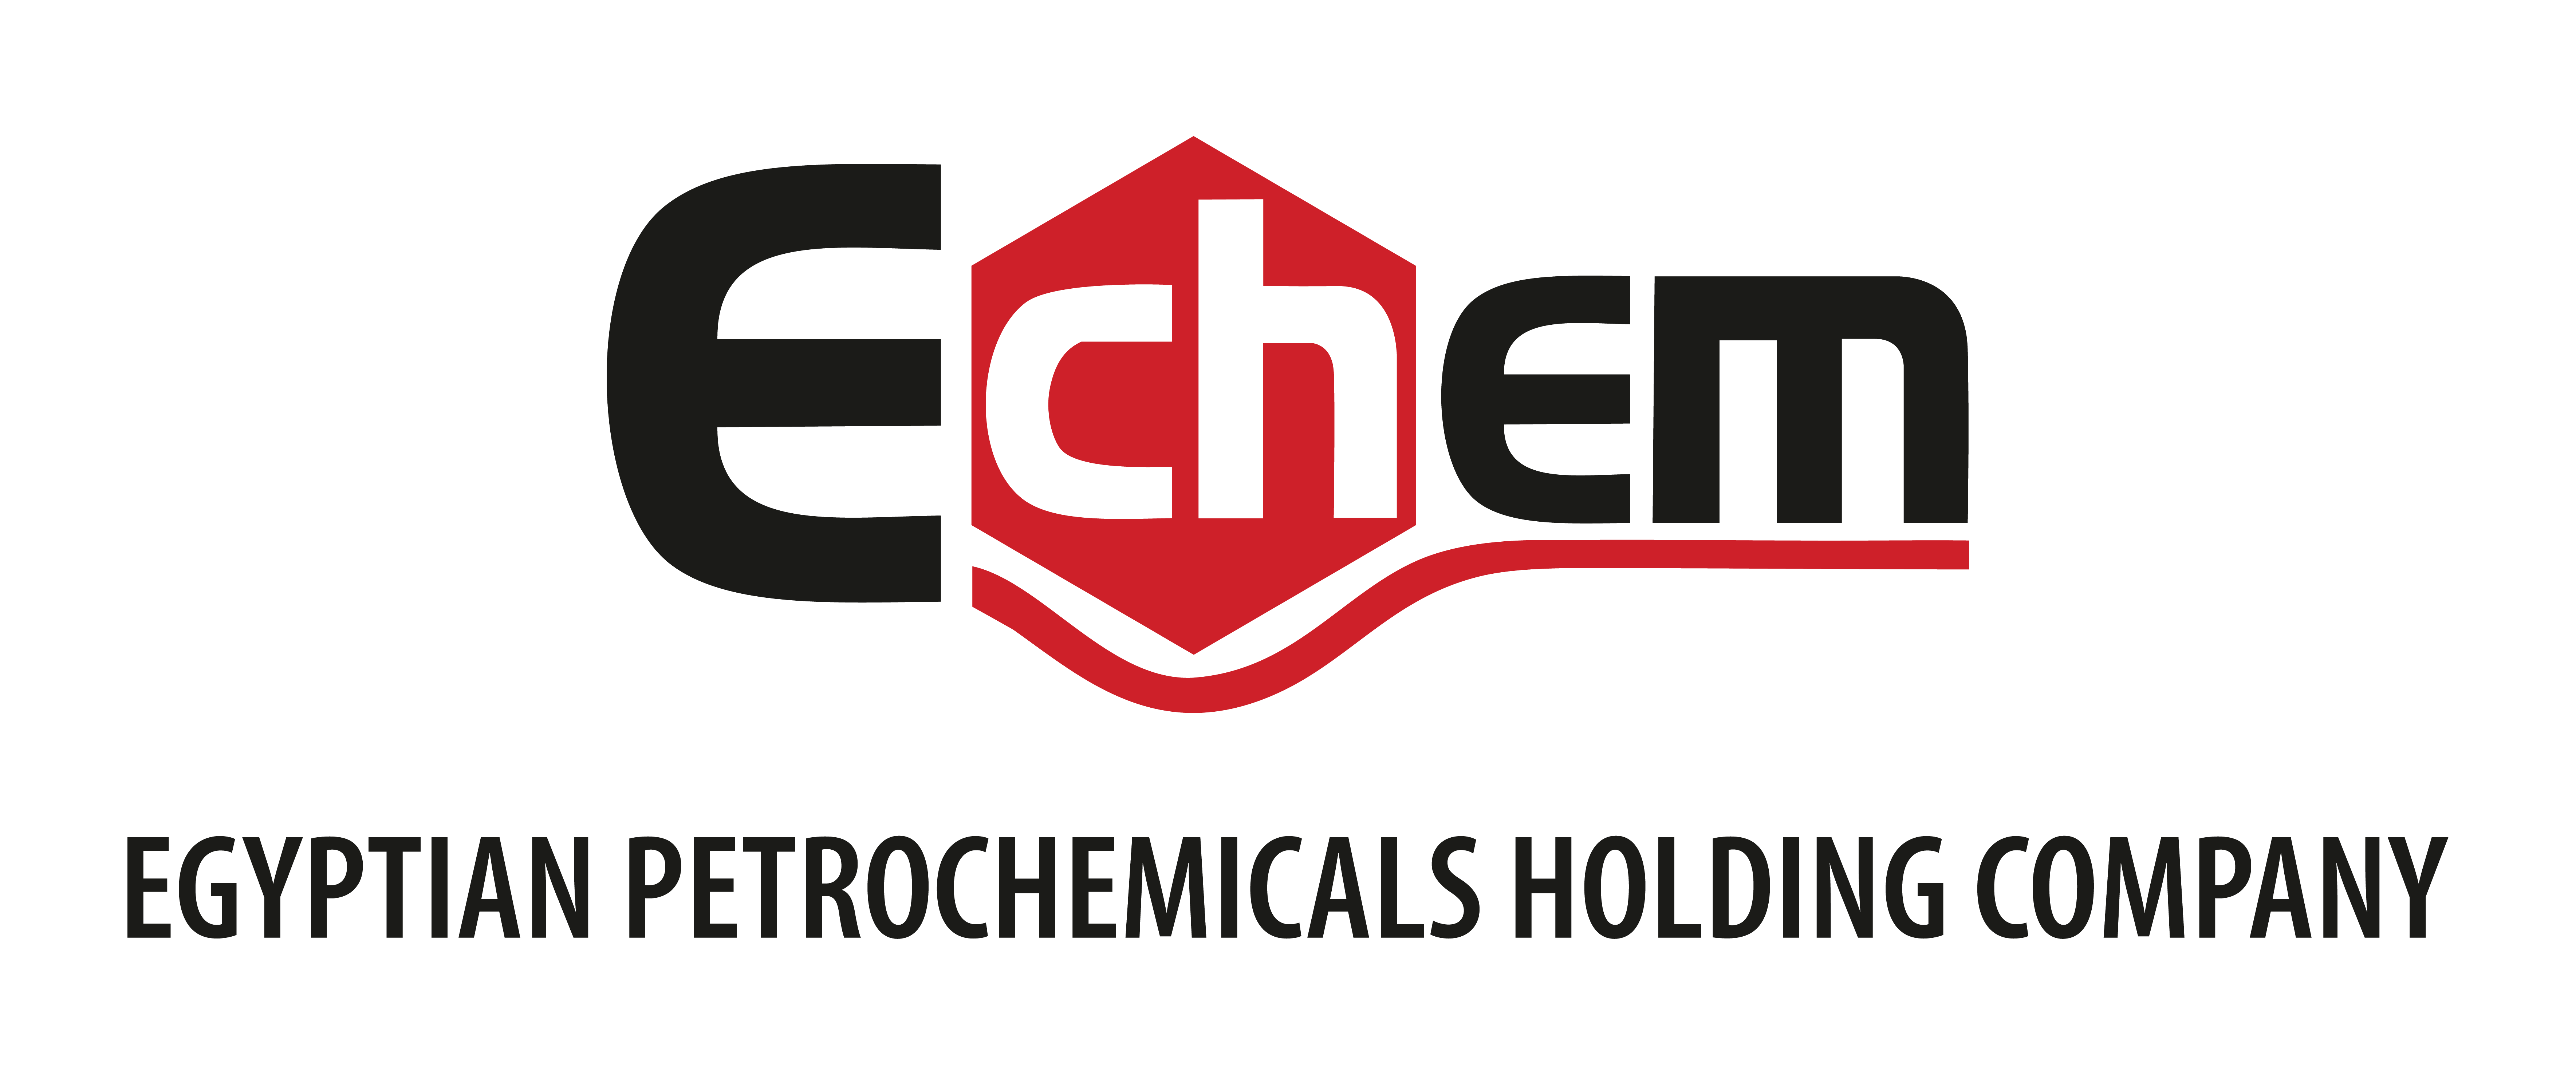 Egyptian Petrochemicals Holding Company (1)